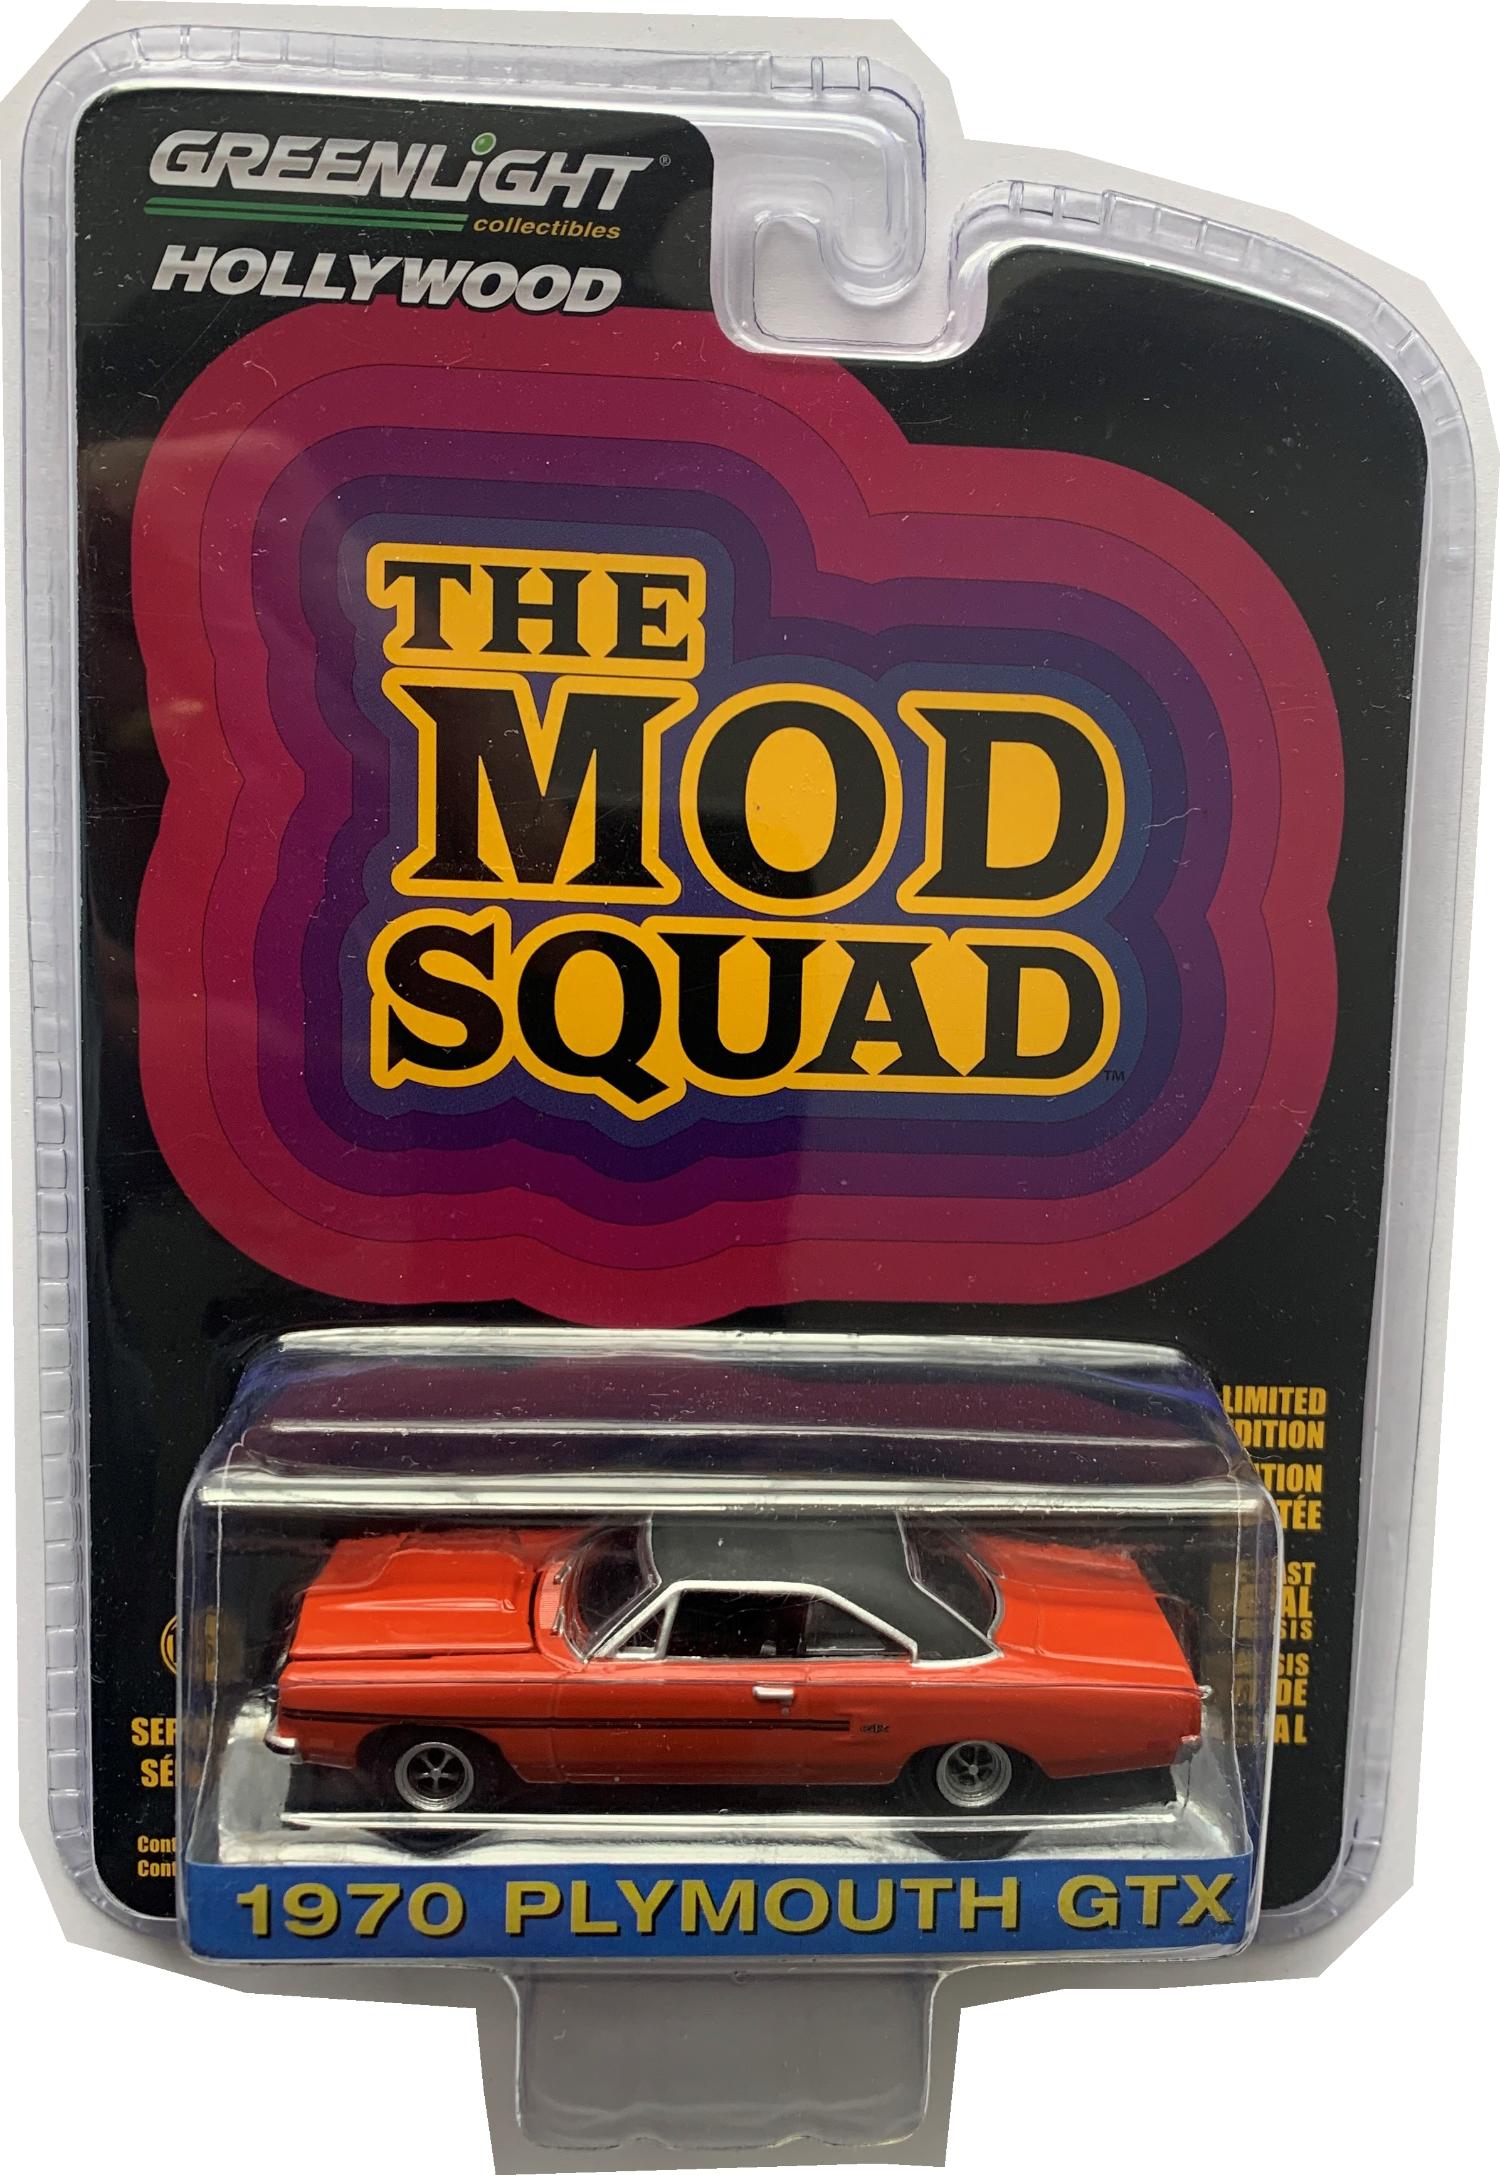 From the TV show ' The Mod Squad' 1970 Plymouth GTX in red 1:64 scale model from Greenlight Hollywood, series 29, limited edition model